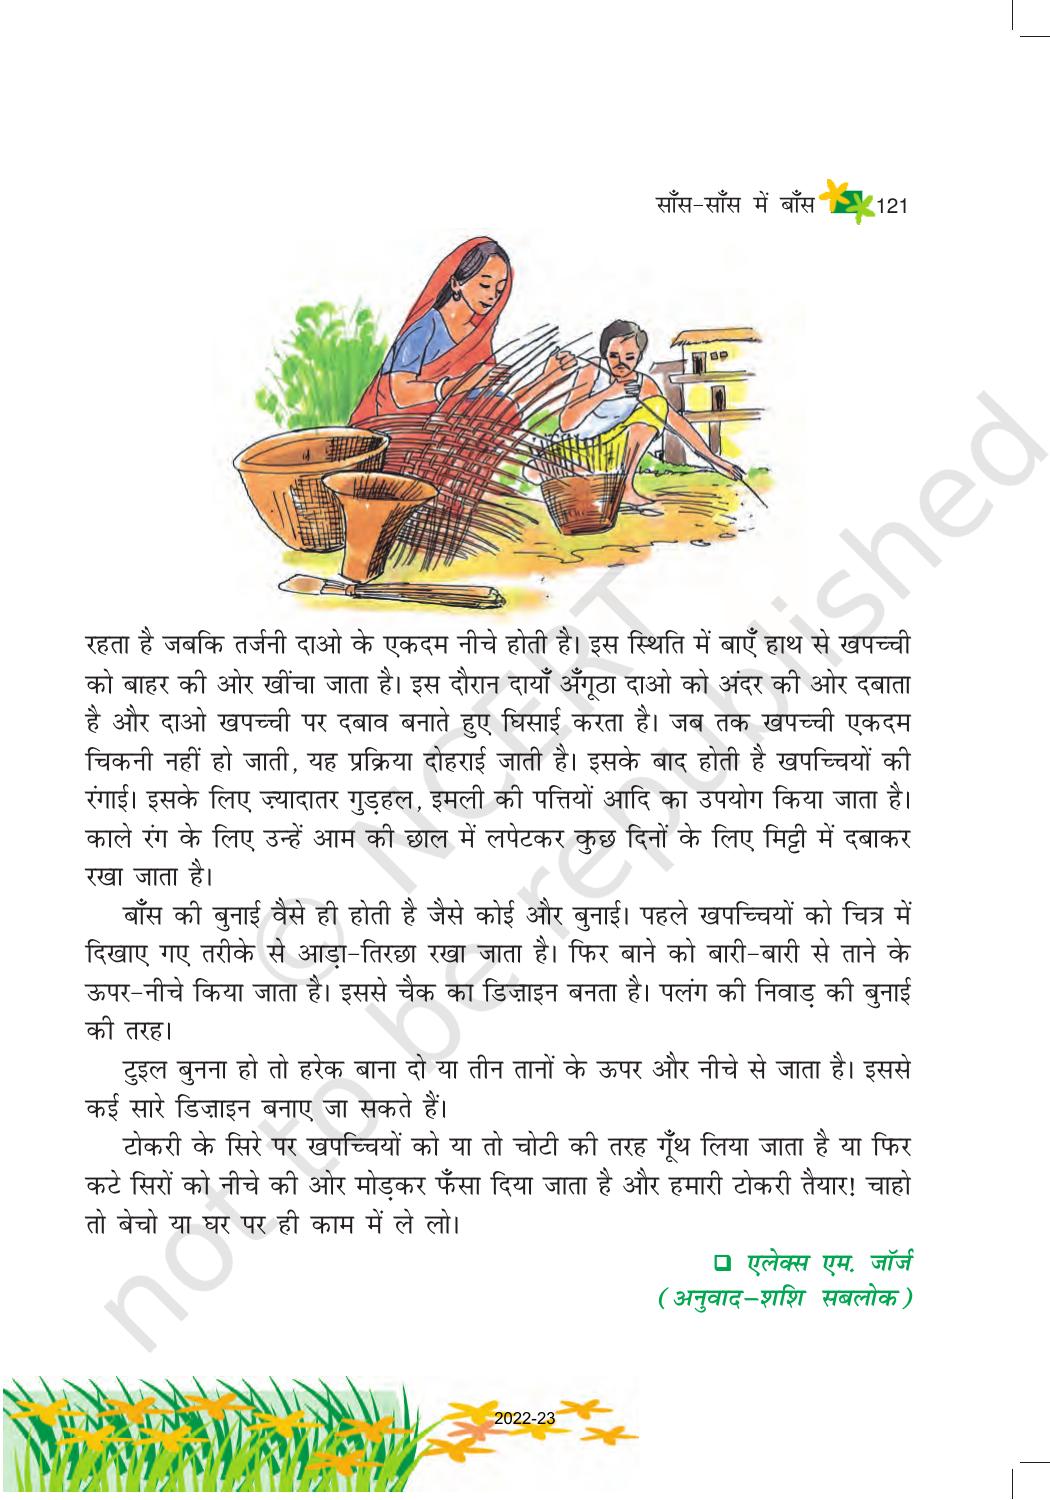 NCERT Book for Class 6 Hindi(Vasant Bhag 1) : Chapter 17-साँस – साँस में बांस - Page 4